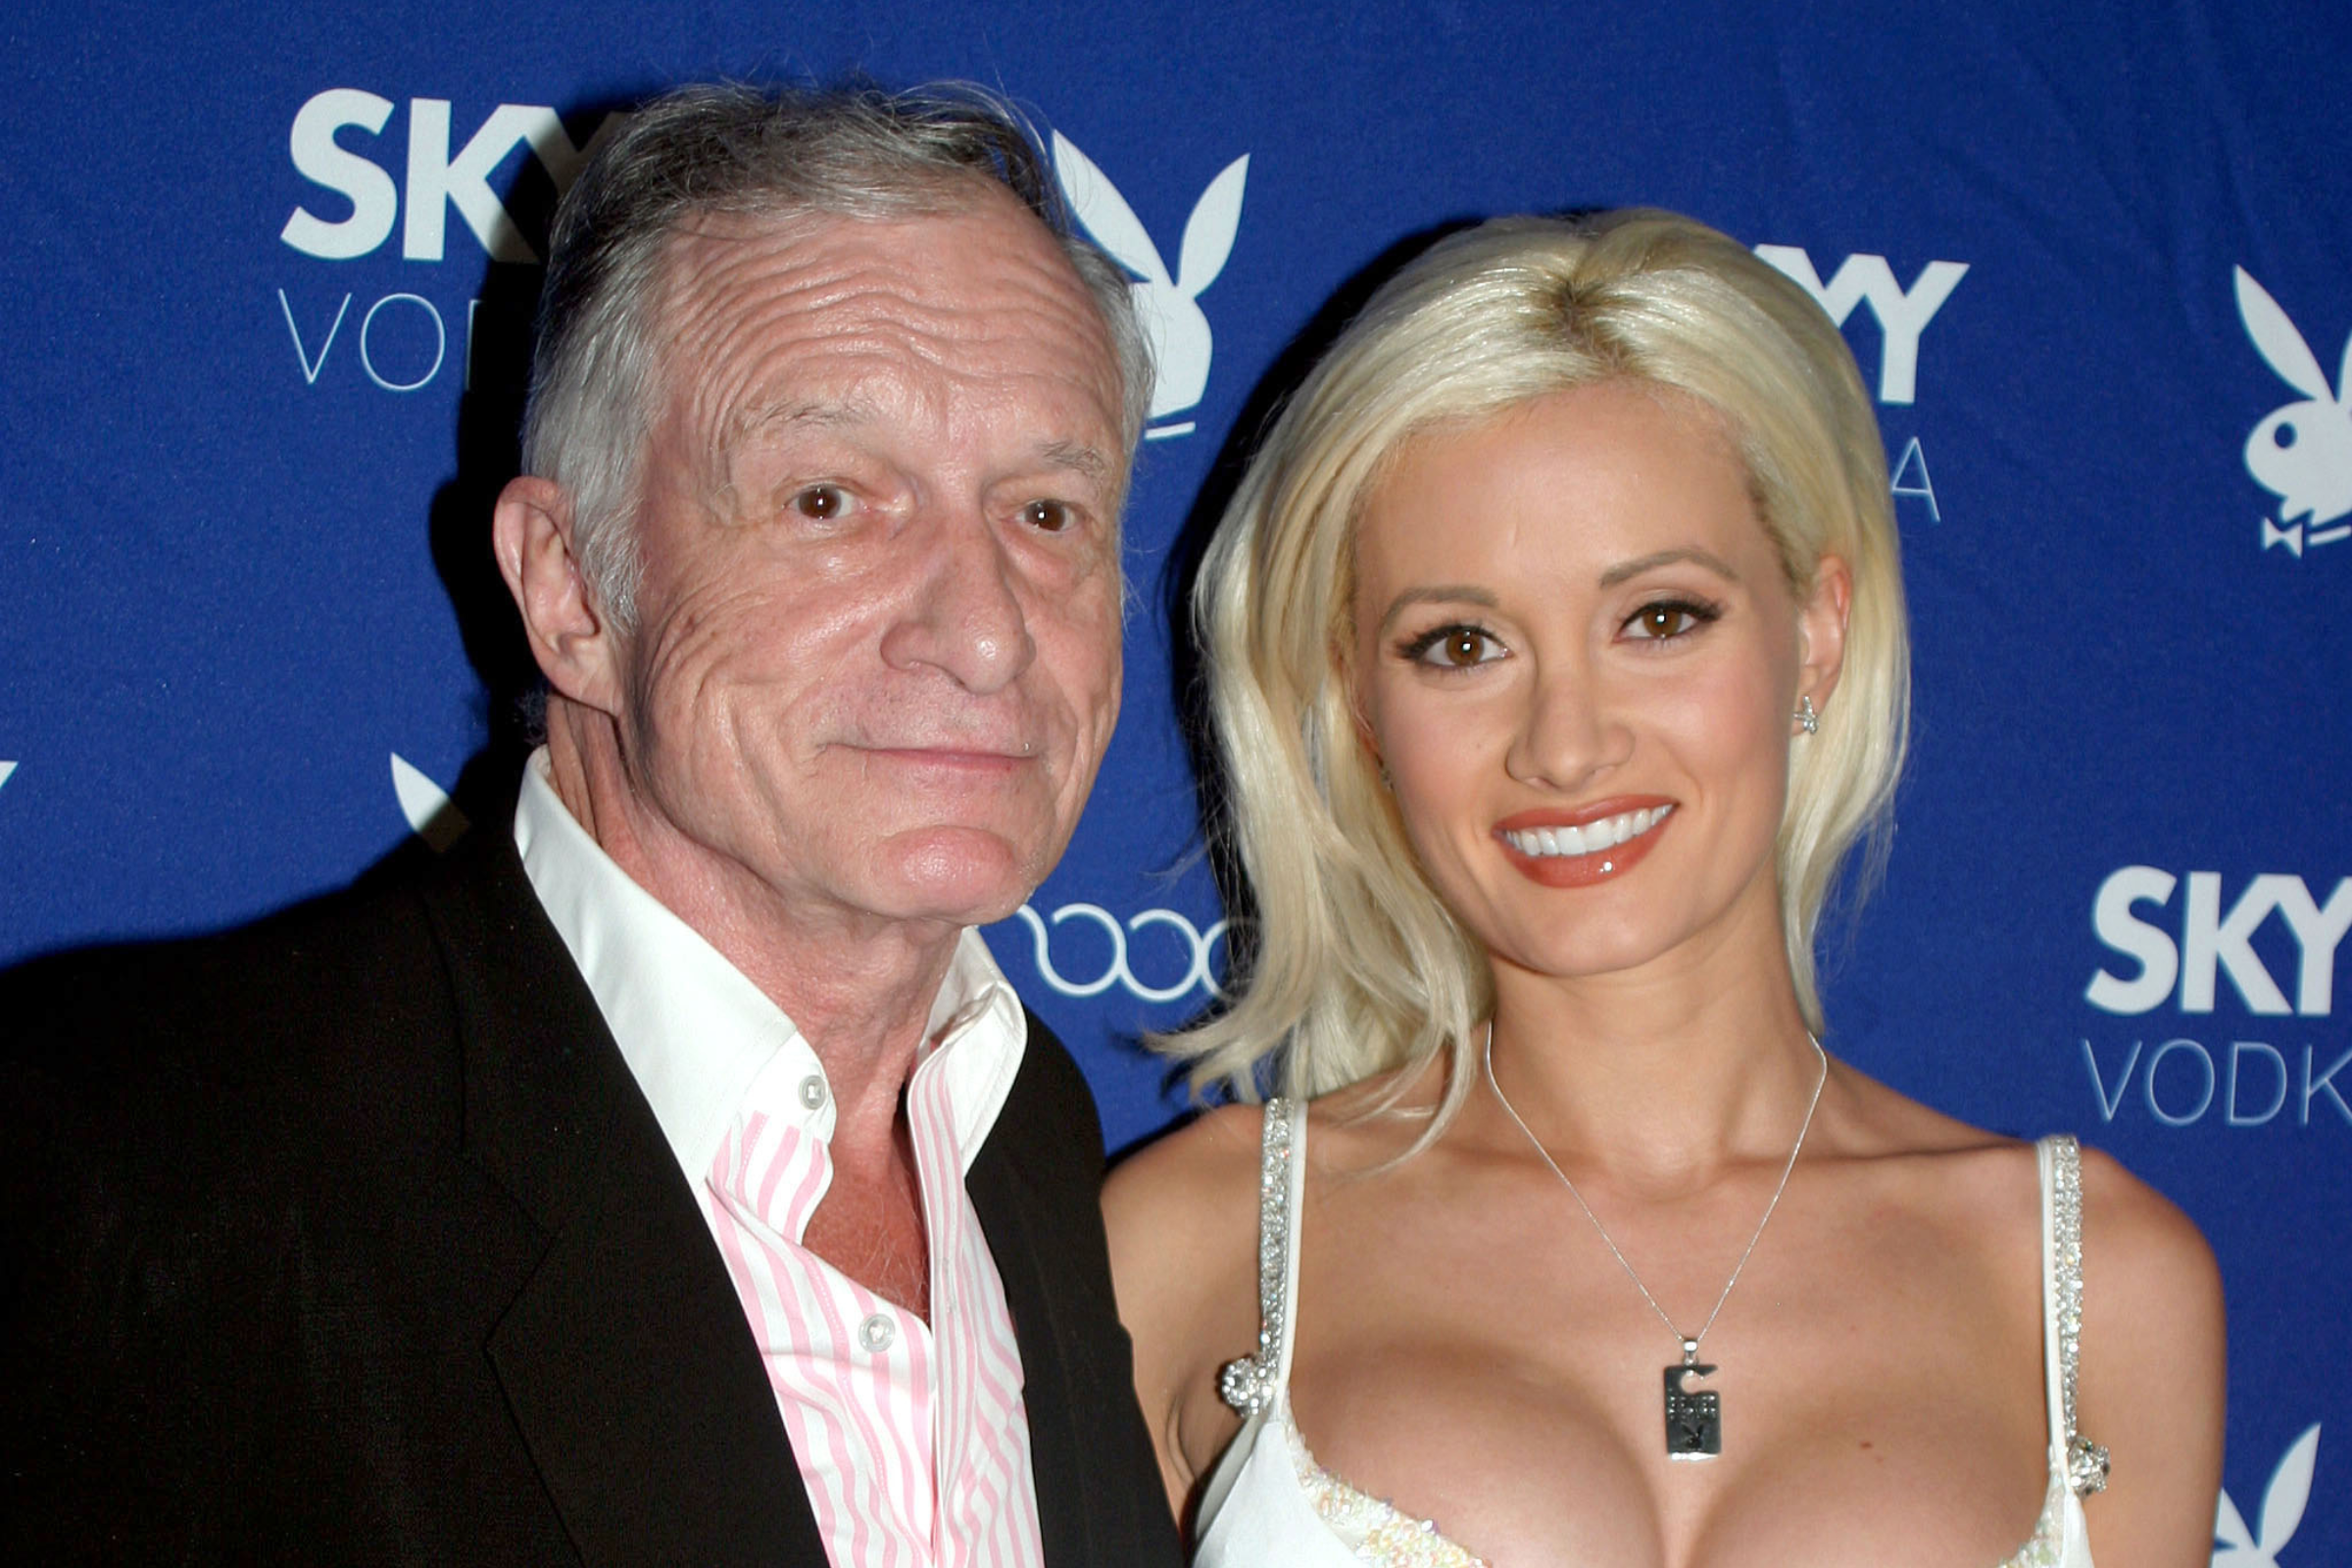 Holly Madison Hef Took Nude Photos of Women When They pic